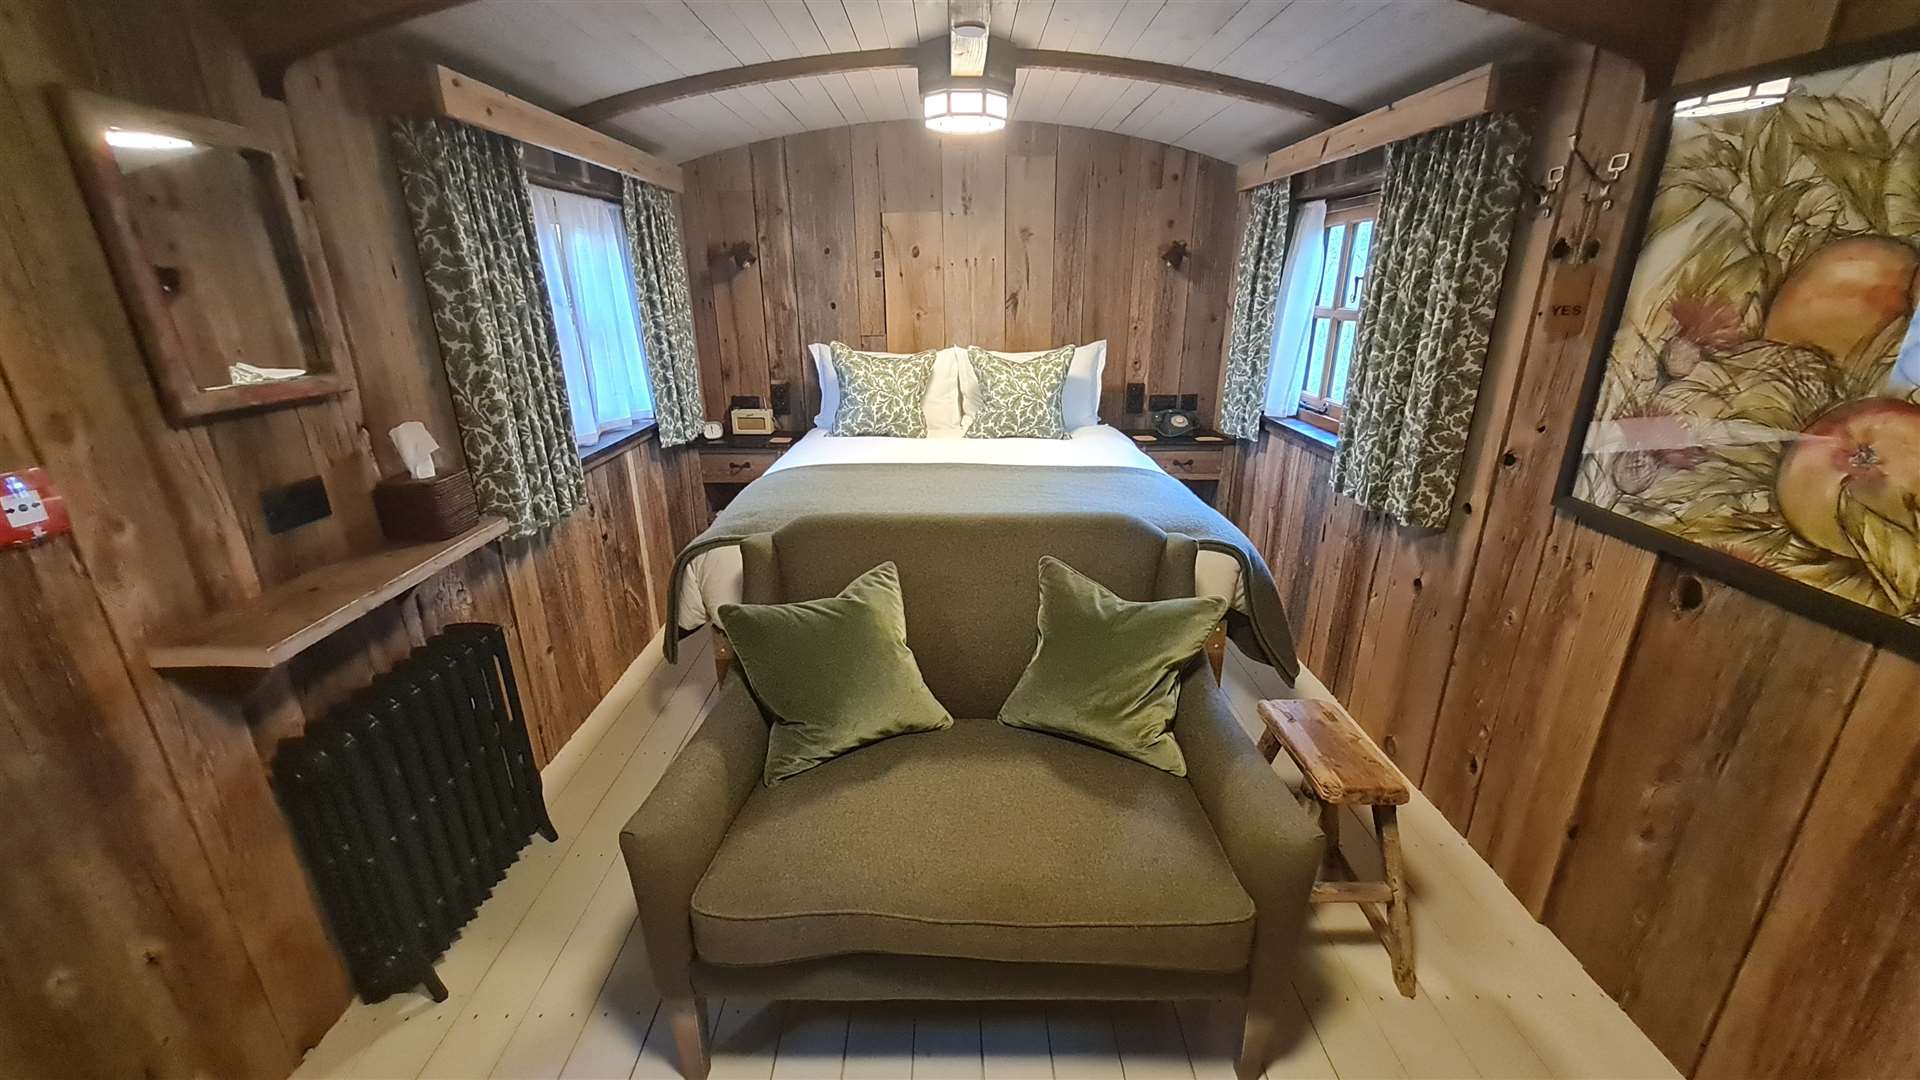 The Stream Wagons have a cosy timber-clad luxury interior